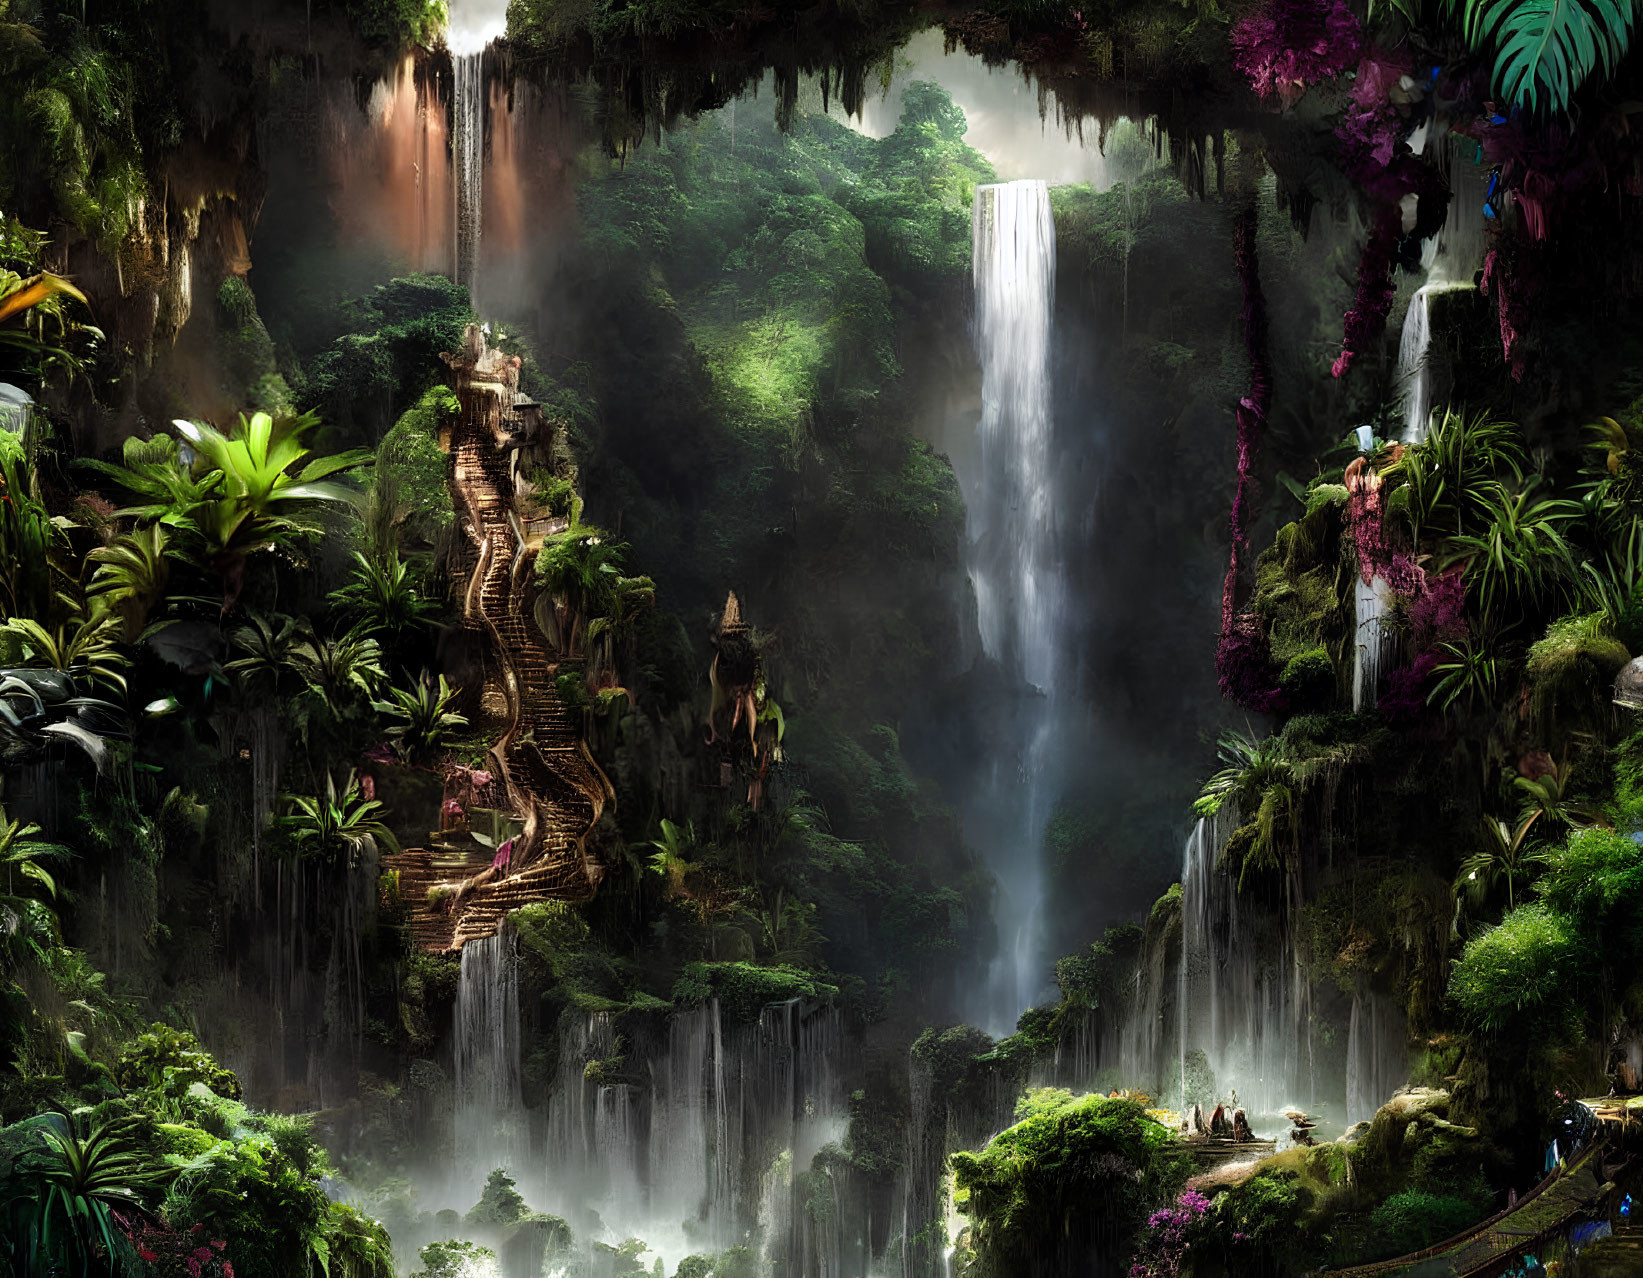 Lush forest with waterfalls, exotic vegetation, and ancient stairs